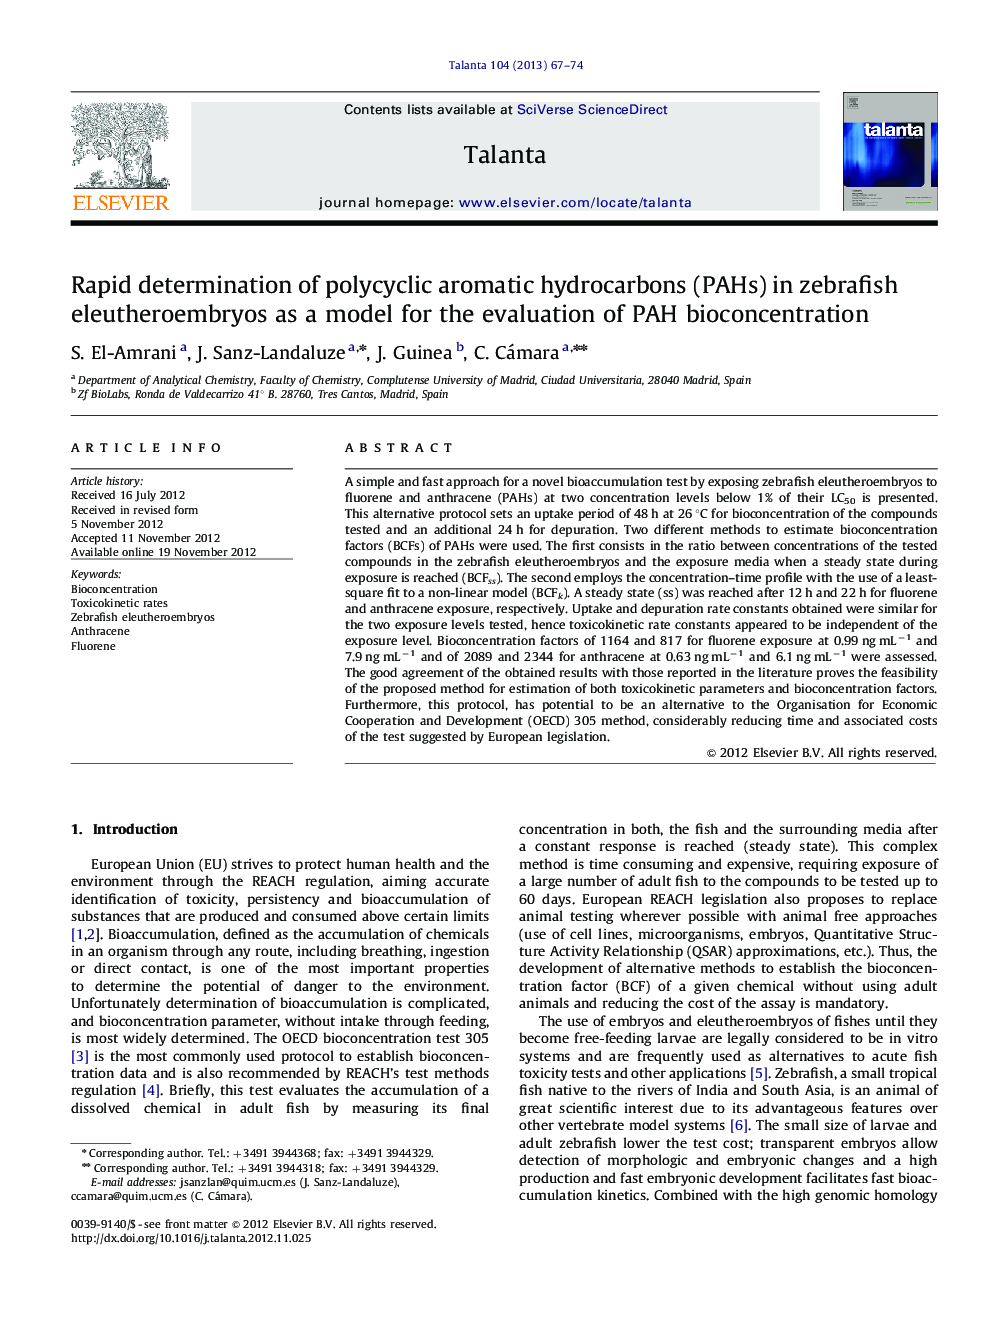 Rapid determination of polycyclic aromatic hydrocarbons (PAHs) in zebrafish eleutheroembryos as a model for the evaluation of PAH bioconcentration